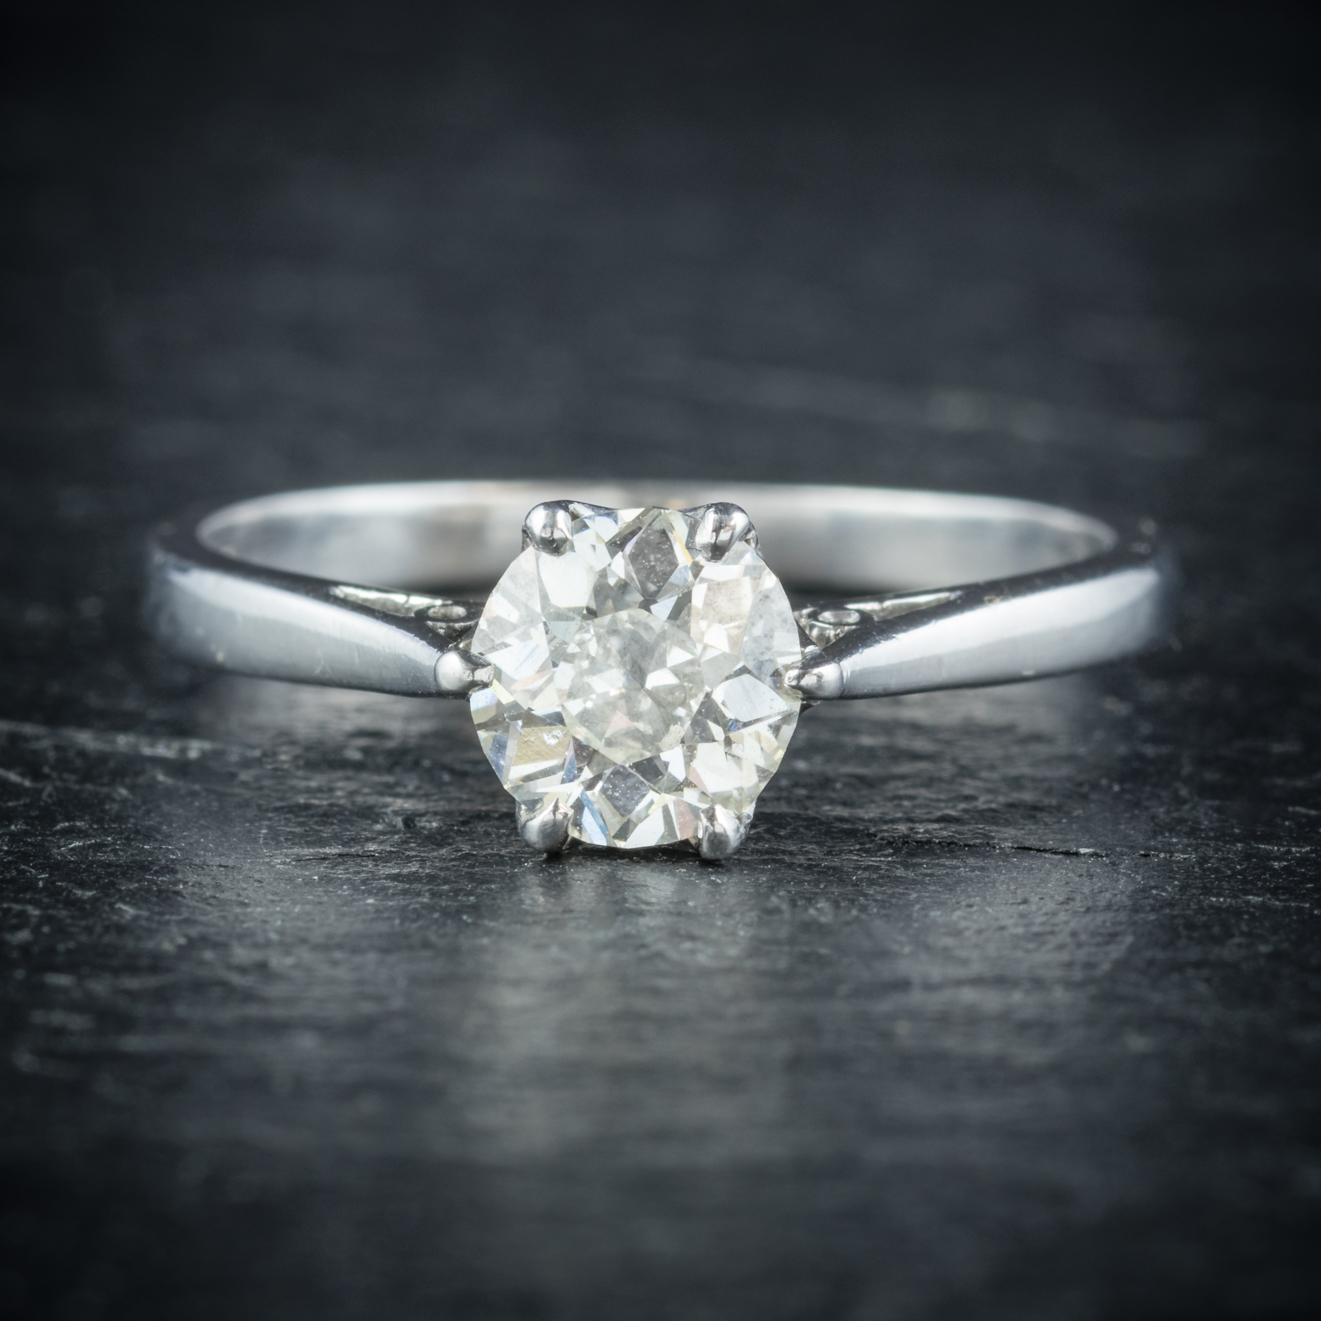 This beautiful antique Edwardian Diamond Solitaire ring is dated London, Circa 1910

Adorned with a stunning 0.88ct old cut Diamond which is SI/ 1 Clarity and H colour

Set in a Platinum gallery complete with hallmarks on the inside of the shank

A